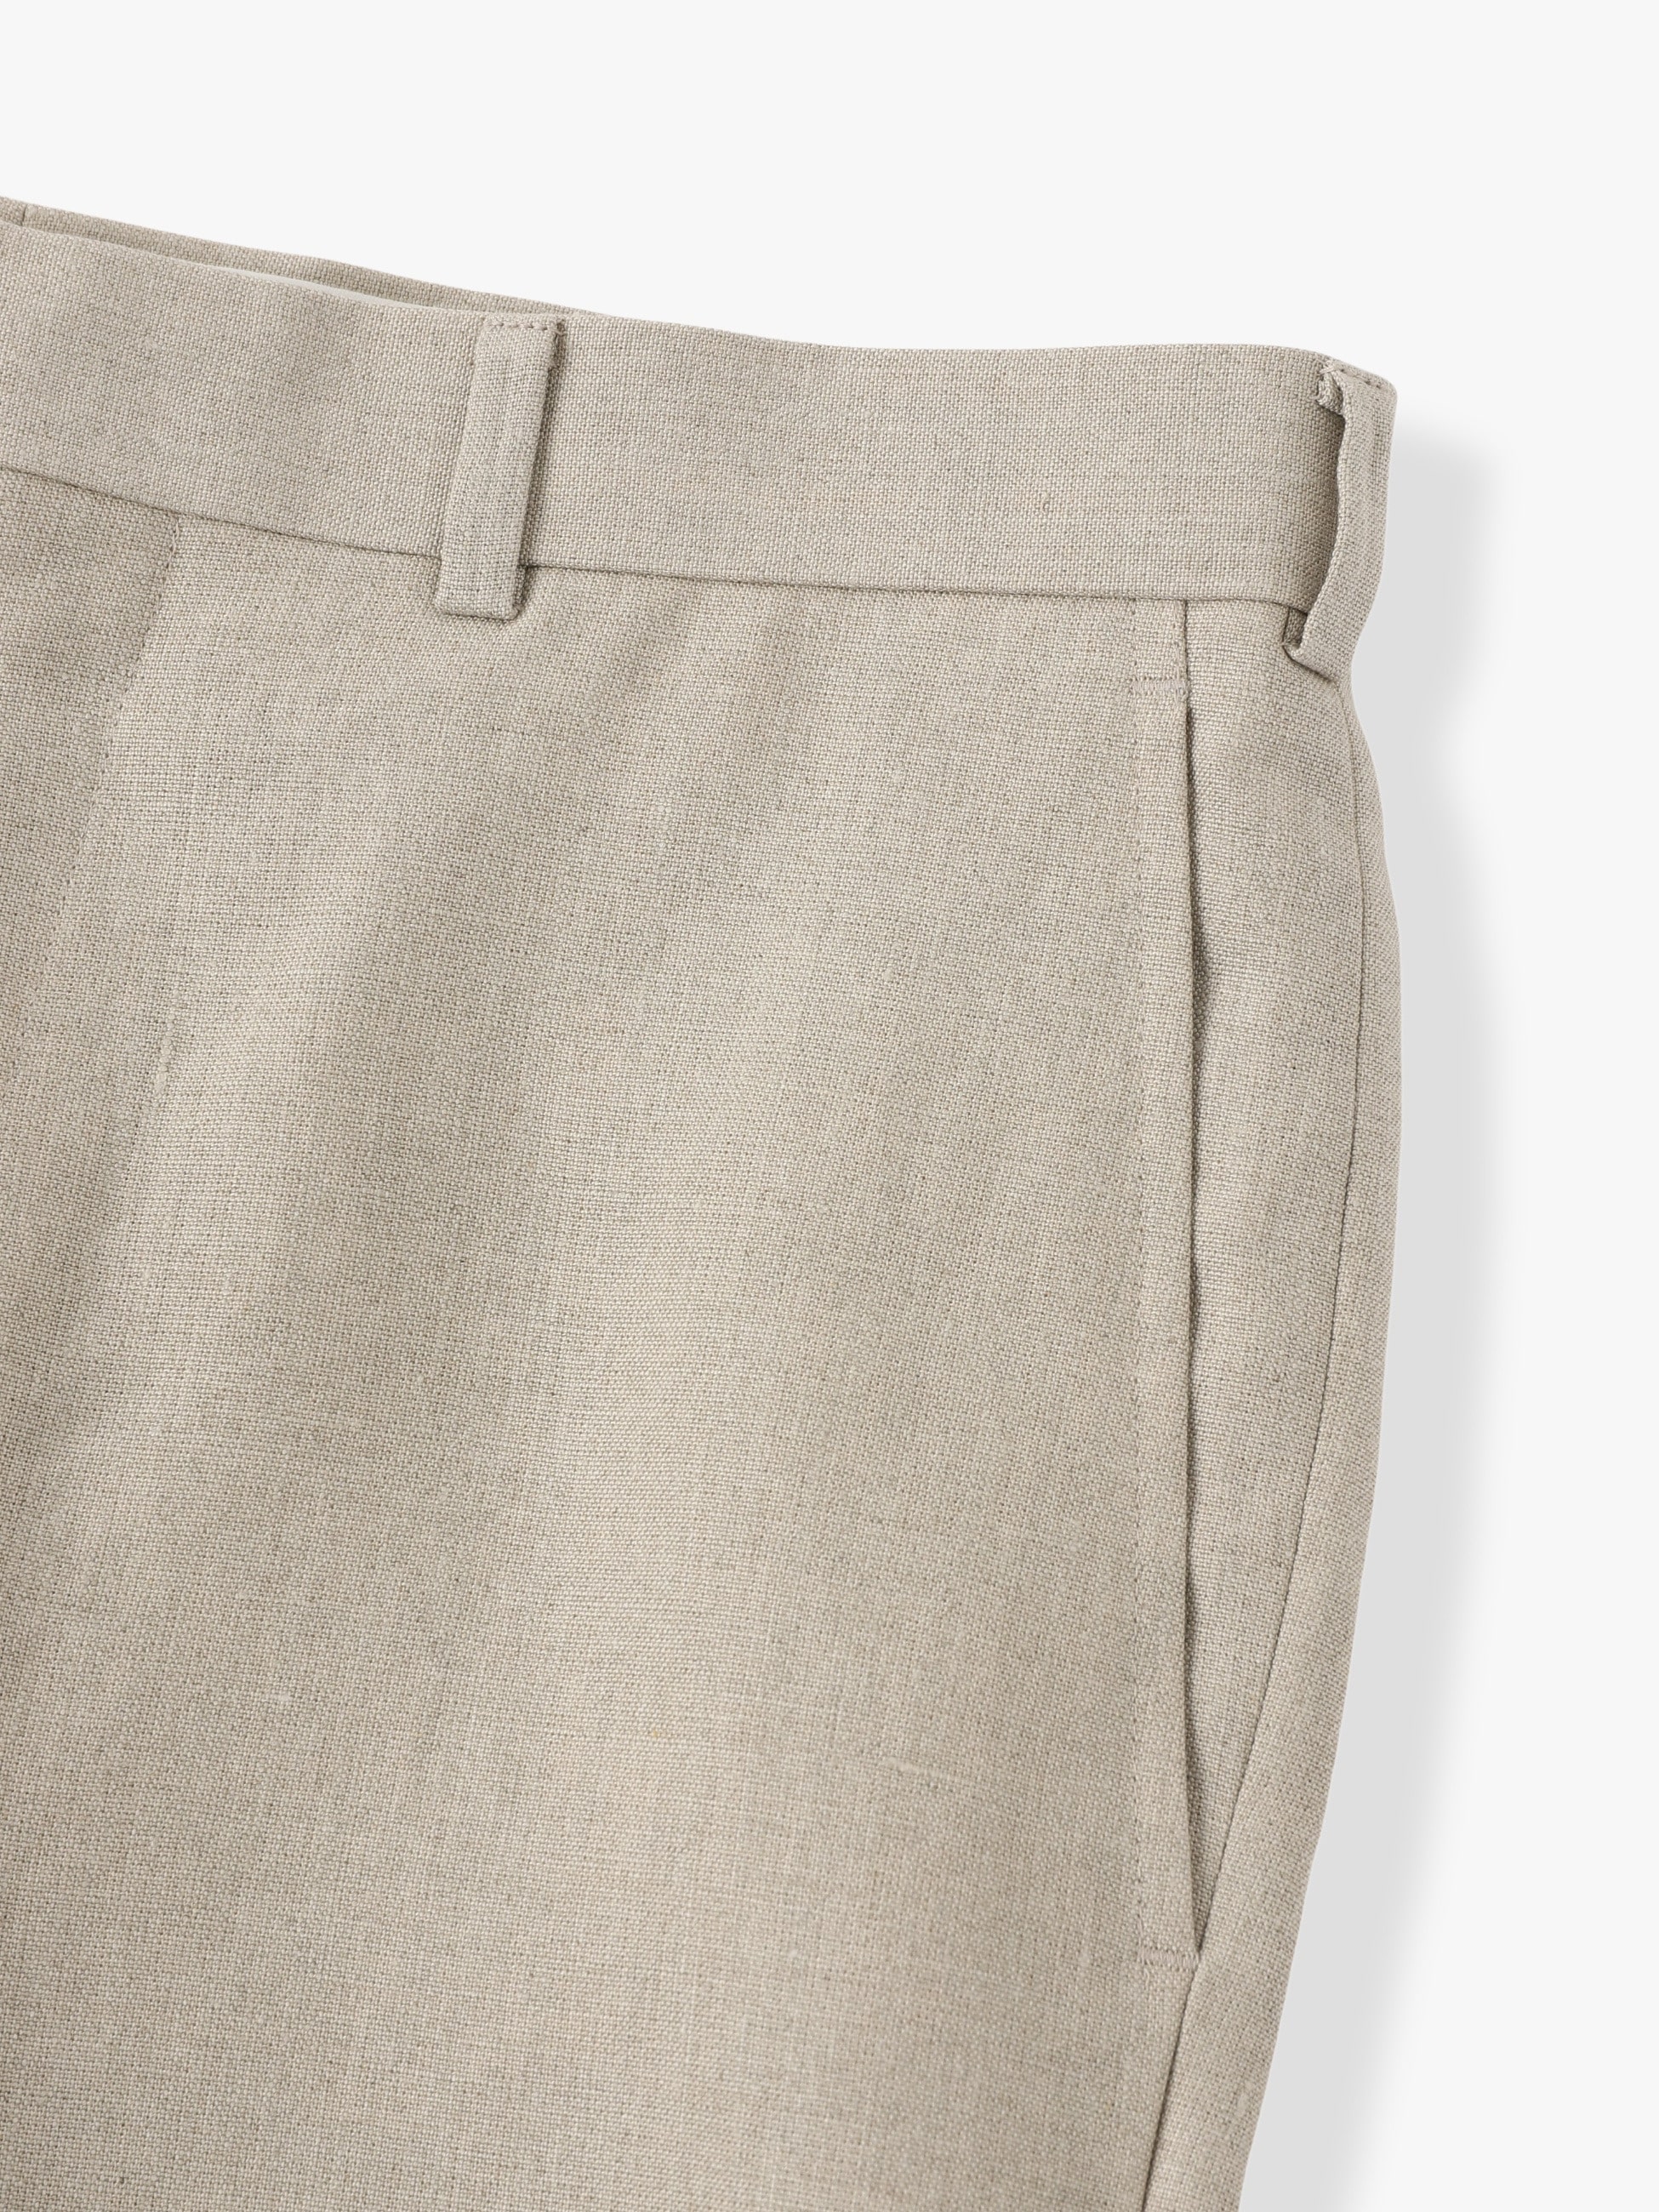 Linen Madison Fit Pants｜Brooks Brothers(ブルックス